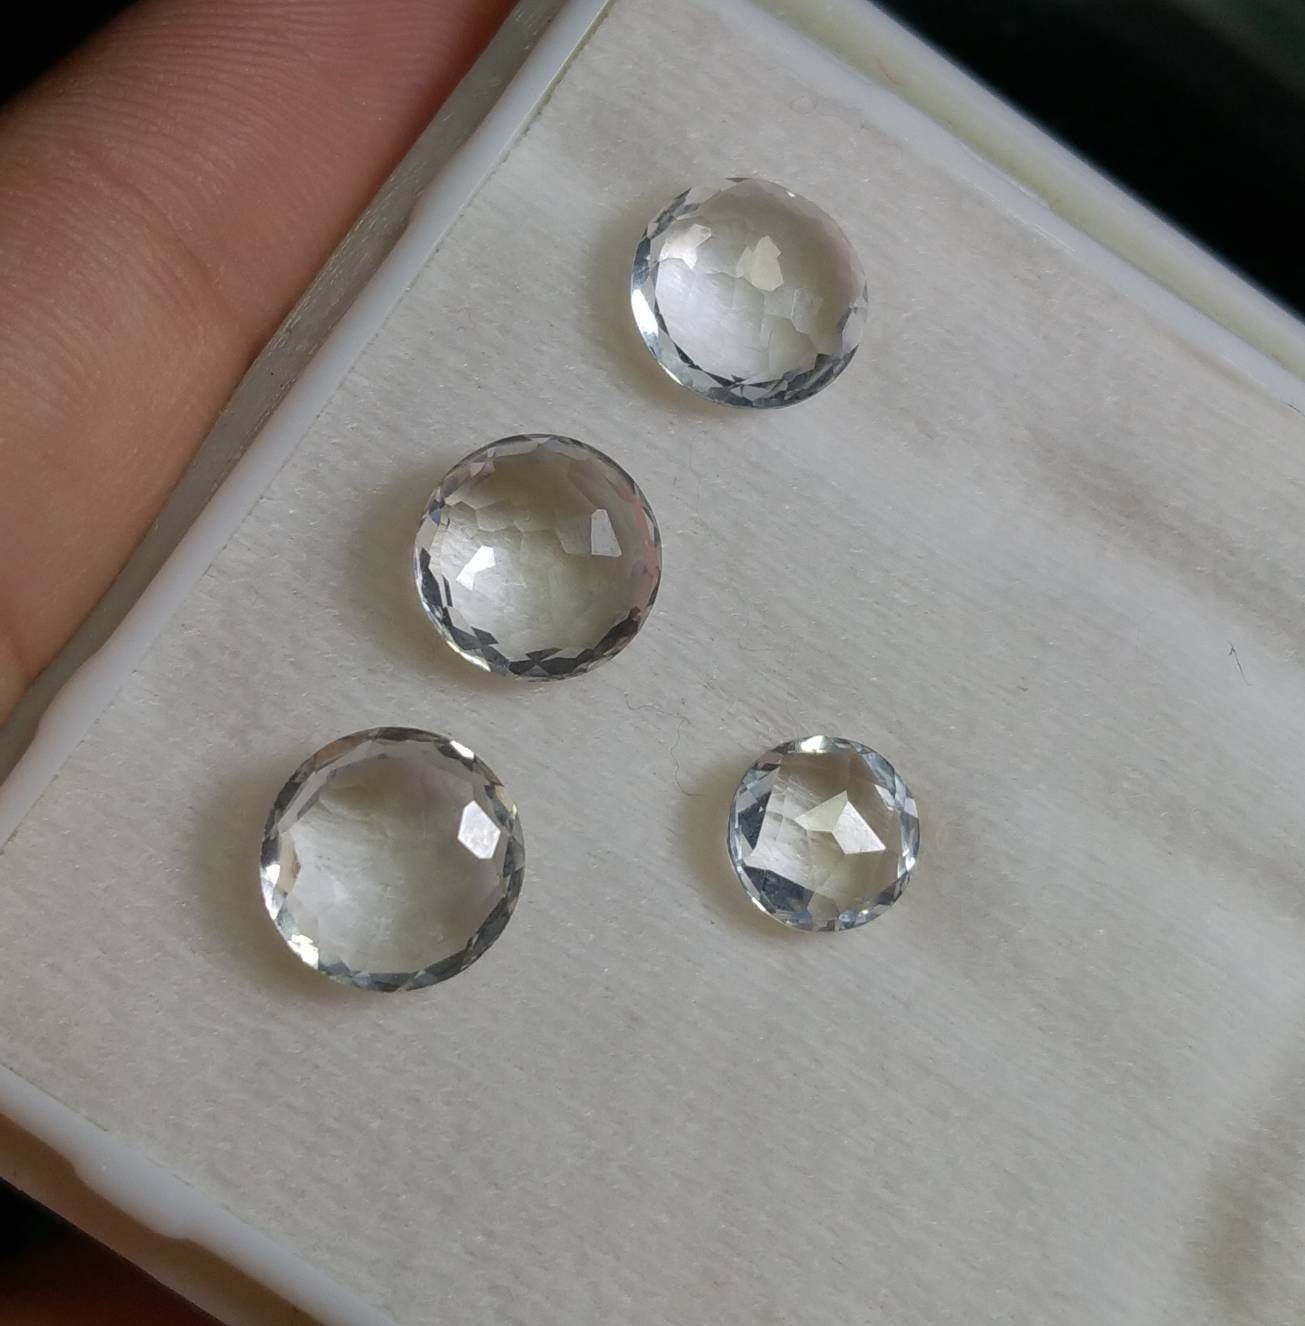 ARSAA GEMS AND MINERALSNatural top quality beautiful 10.5 carats small set of rose cut Faceted quartz Cabochons - Premium  from ARSAA GEMS AND MINERALS - Just $15.00! Shop now at ARSAA GEMS AND MINERALS